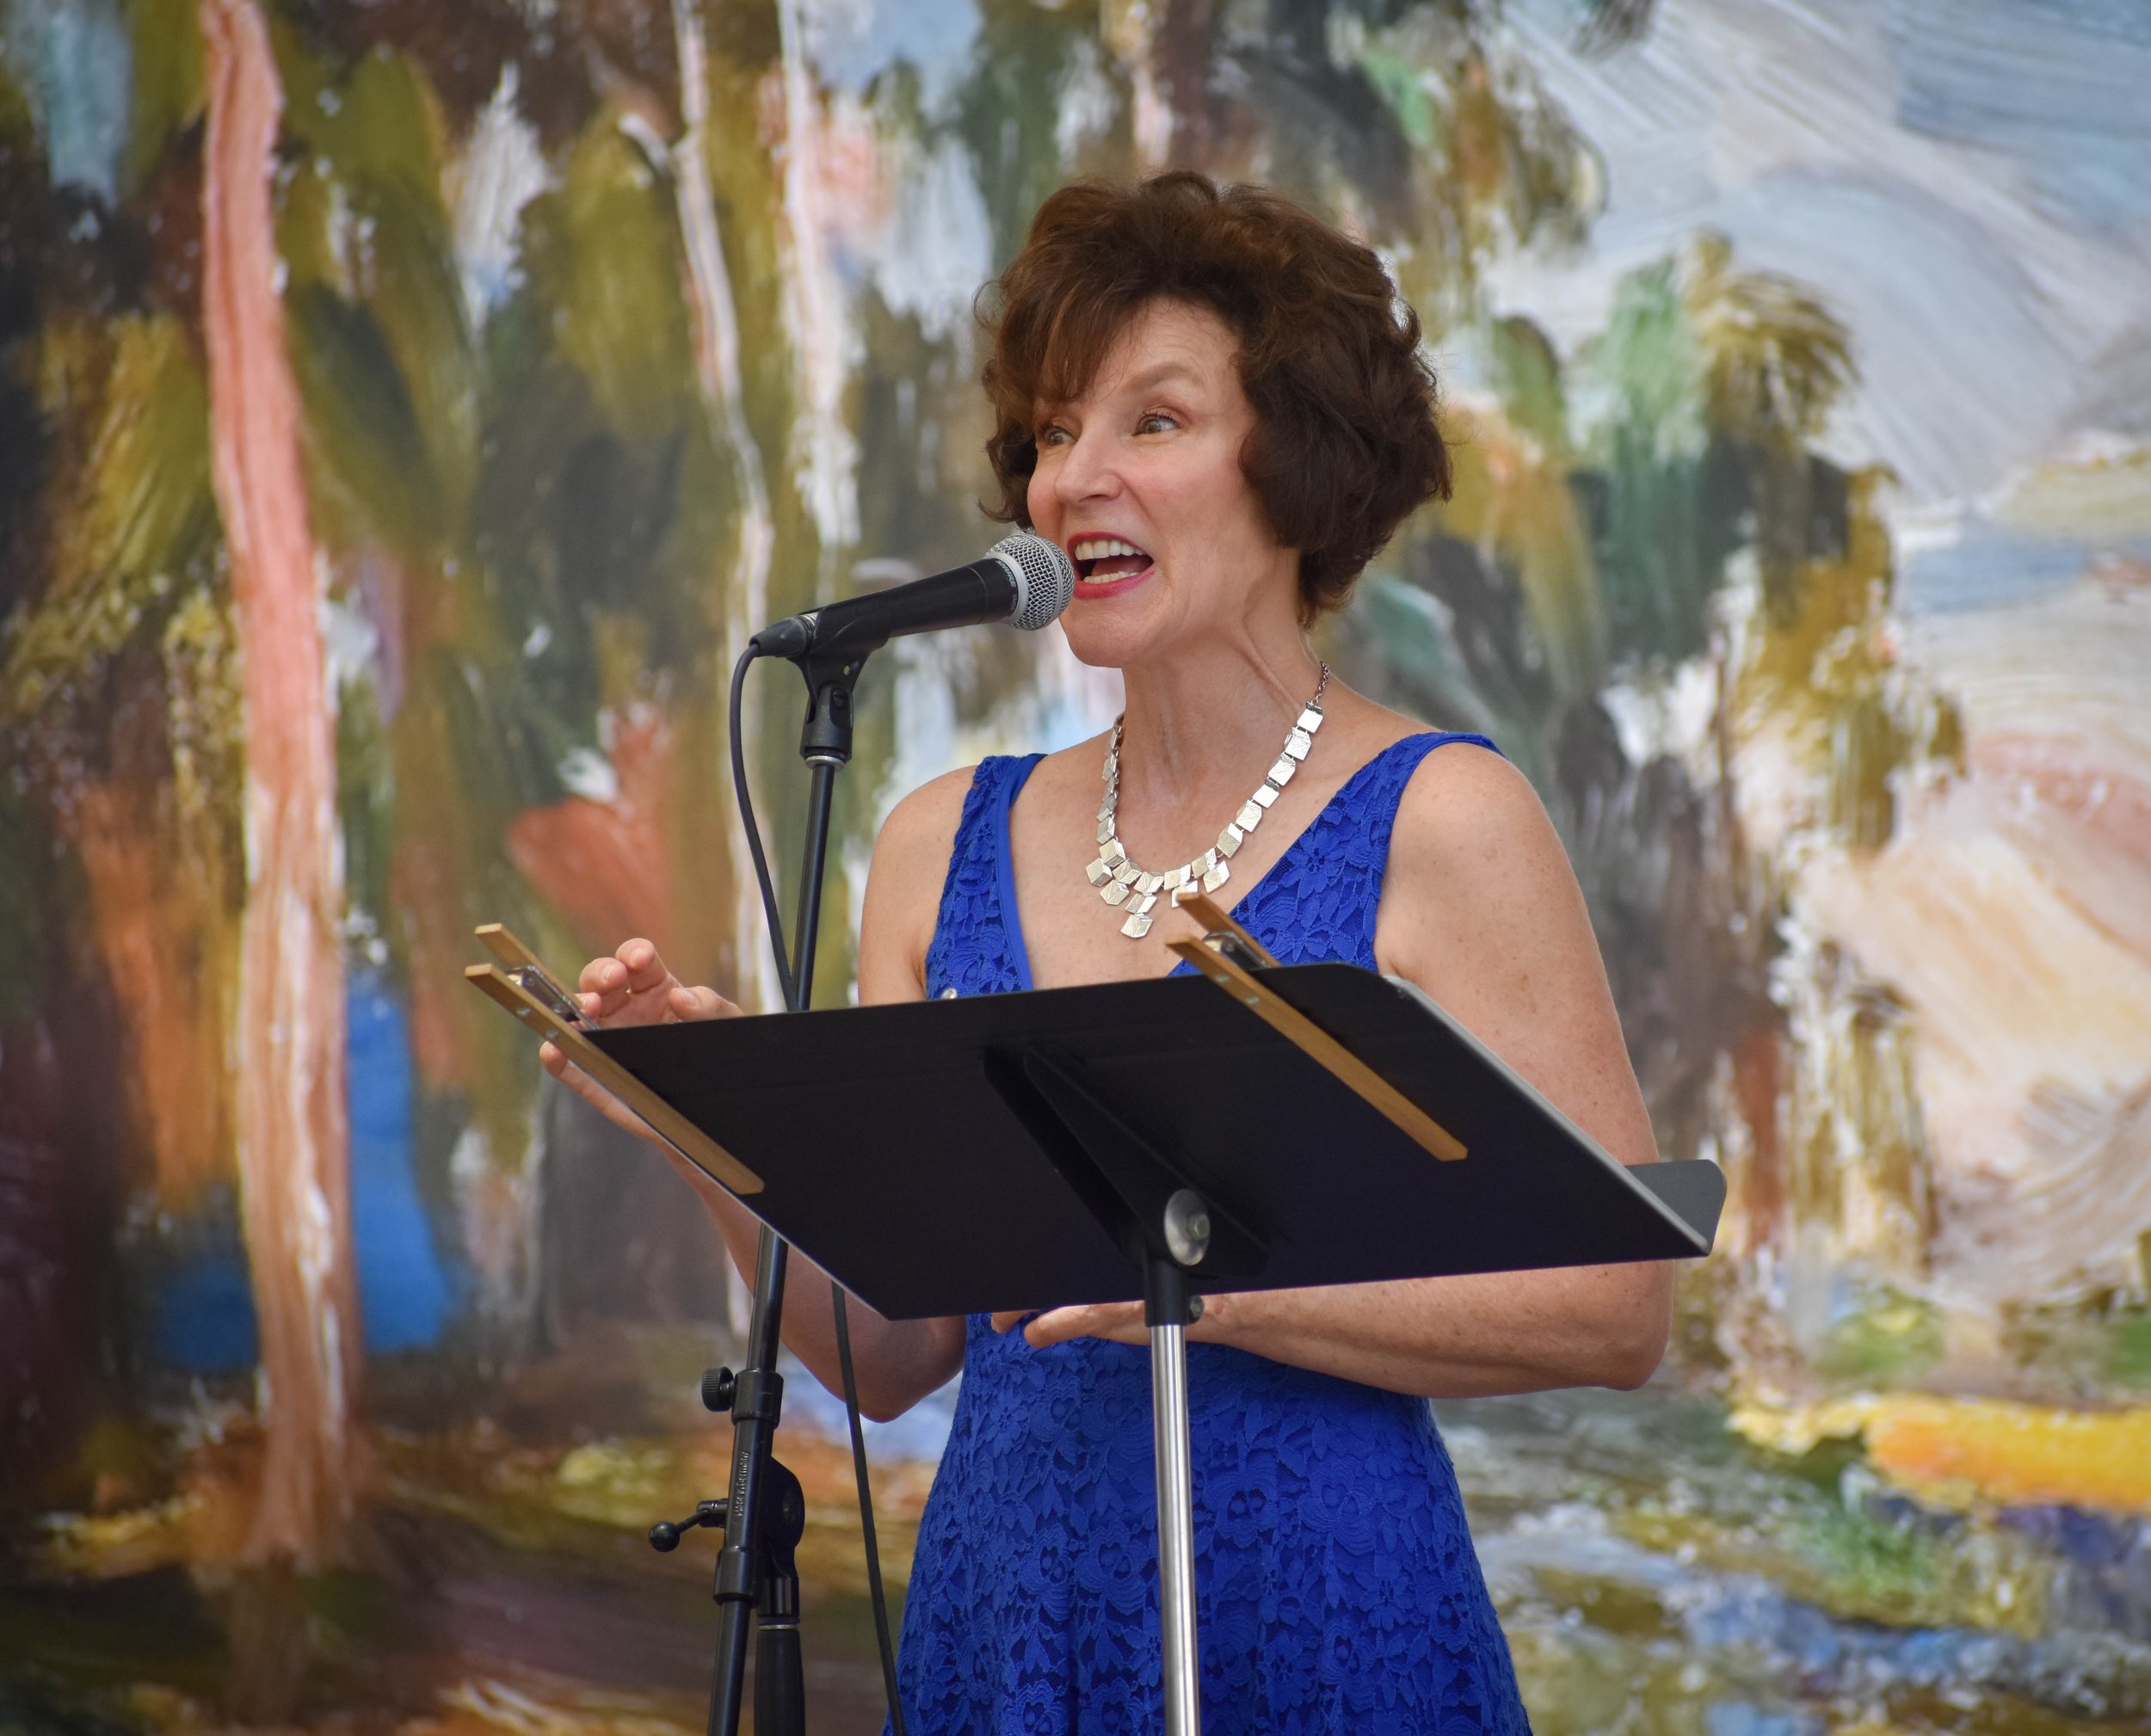 07-17-2022 LCCB Fest of Arts Summer Concert Series by Peyton Webster65-31.jpg